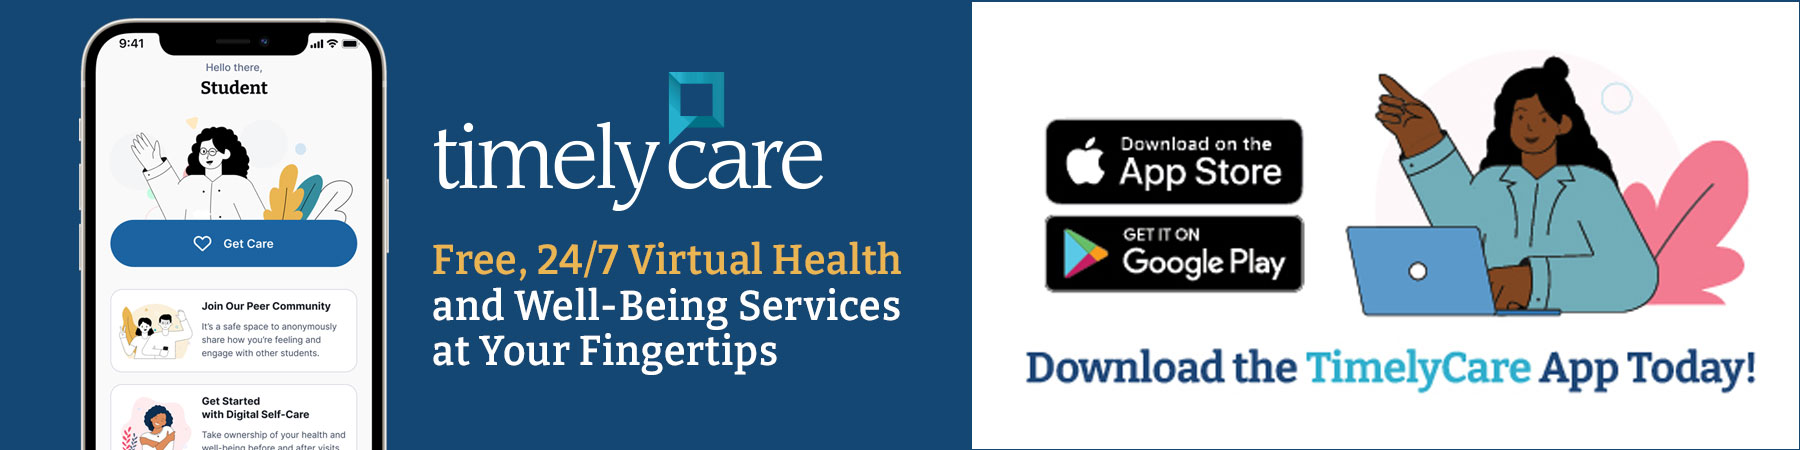 Timelycare - 24/7 Virtual Health Services